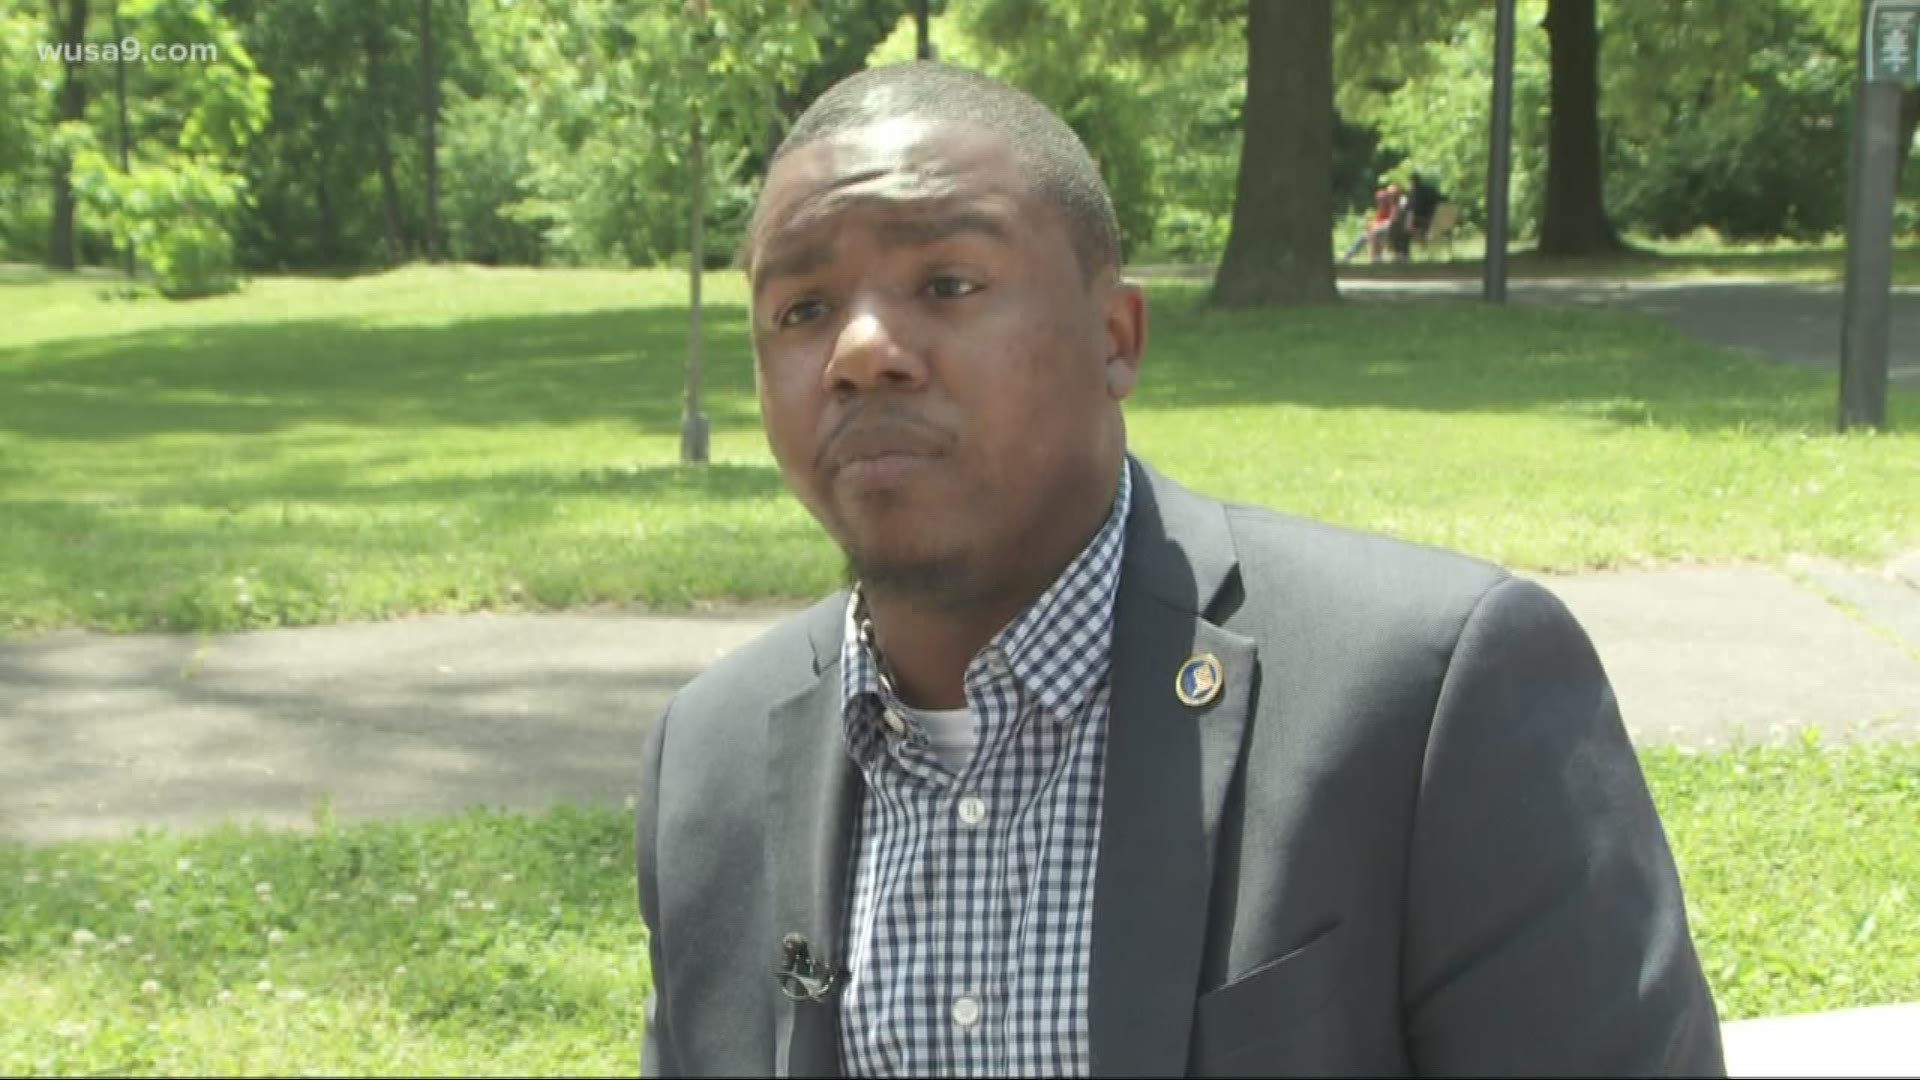 An elected official in Washington, DC said he was not trying to encourage violence against DC Police Officers when he sent a controversial tweet in the wake of another viral cell phone confrontation with officers.